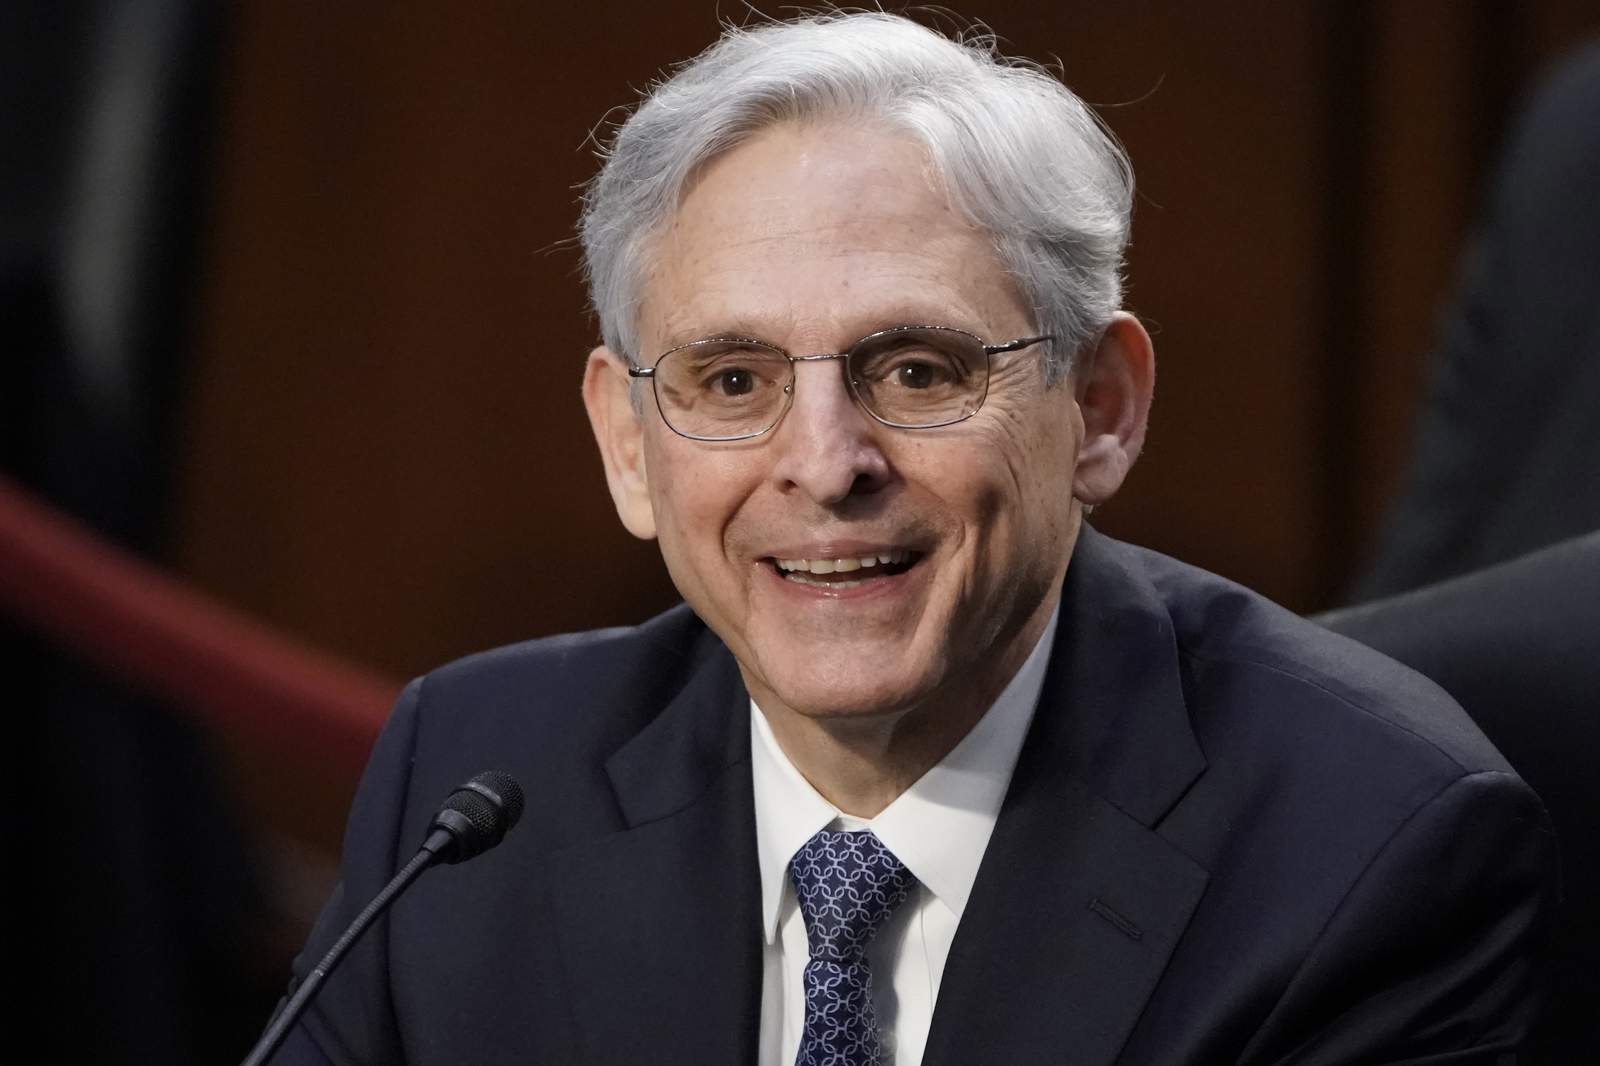 Senate panel votes to advance Garland's nomination to be AG